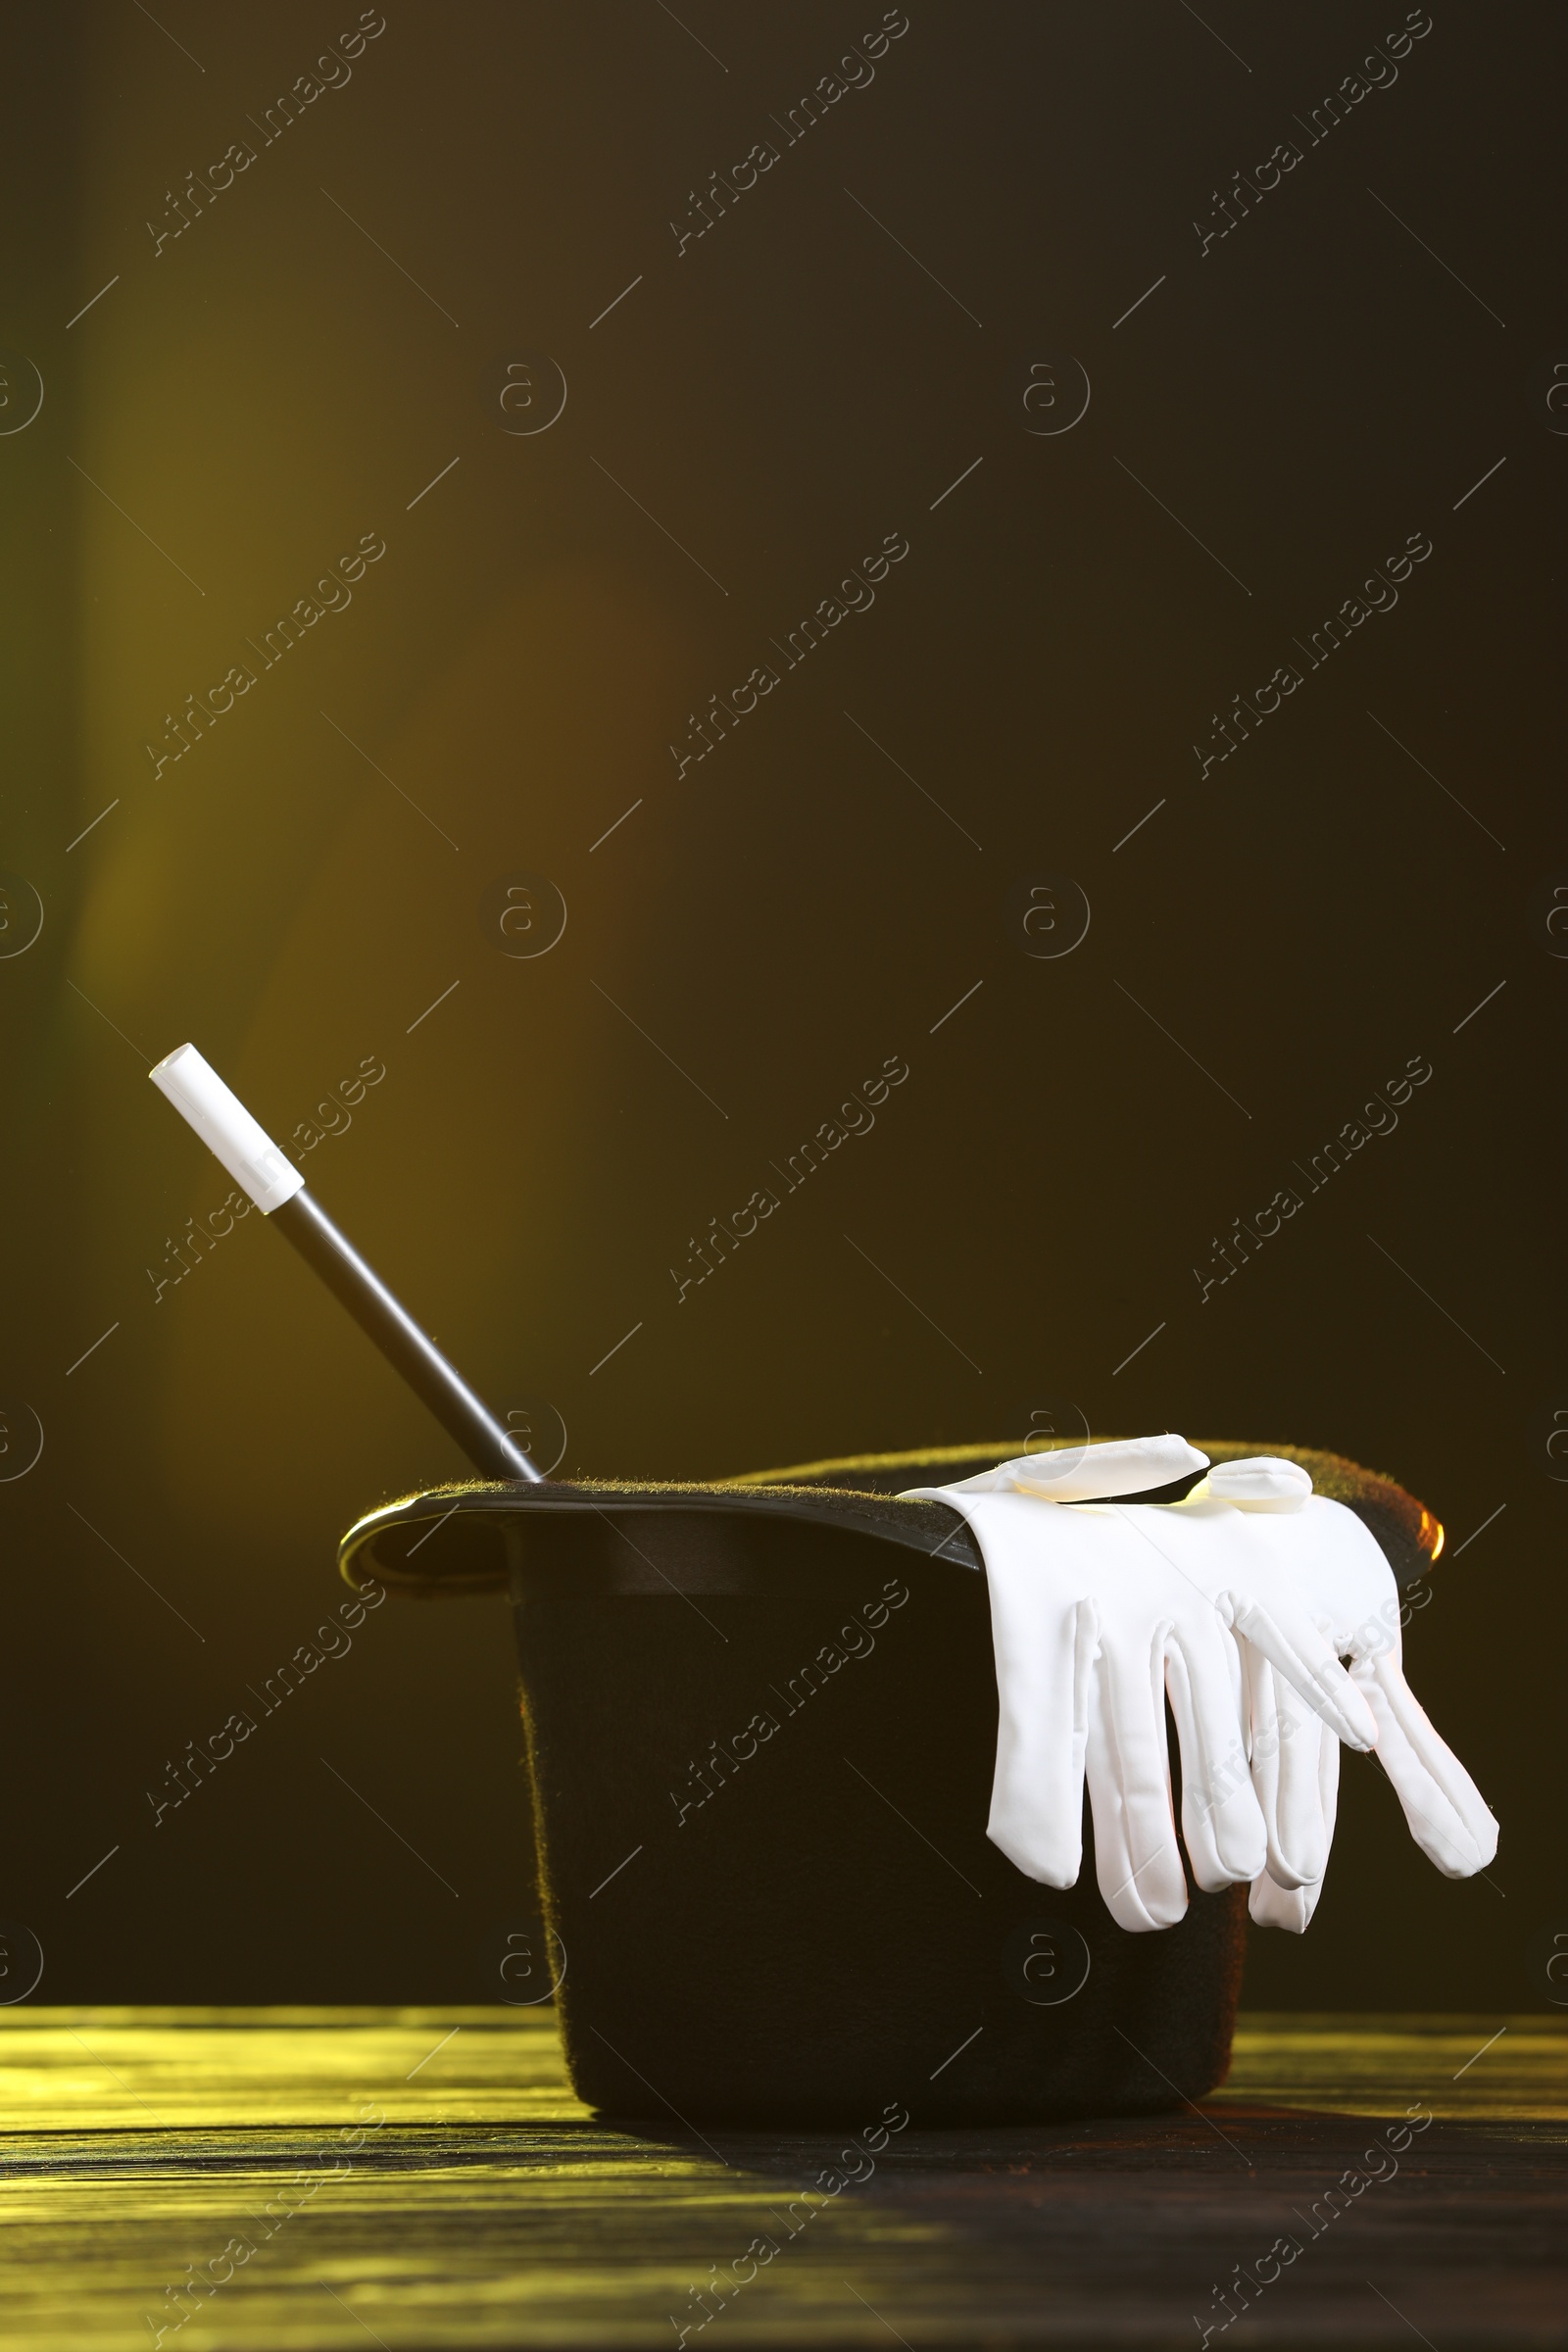 Photo of Magician's hat, wand and gloves on wooden table against dark background, space for text